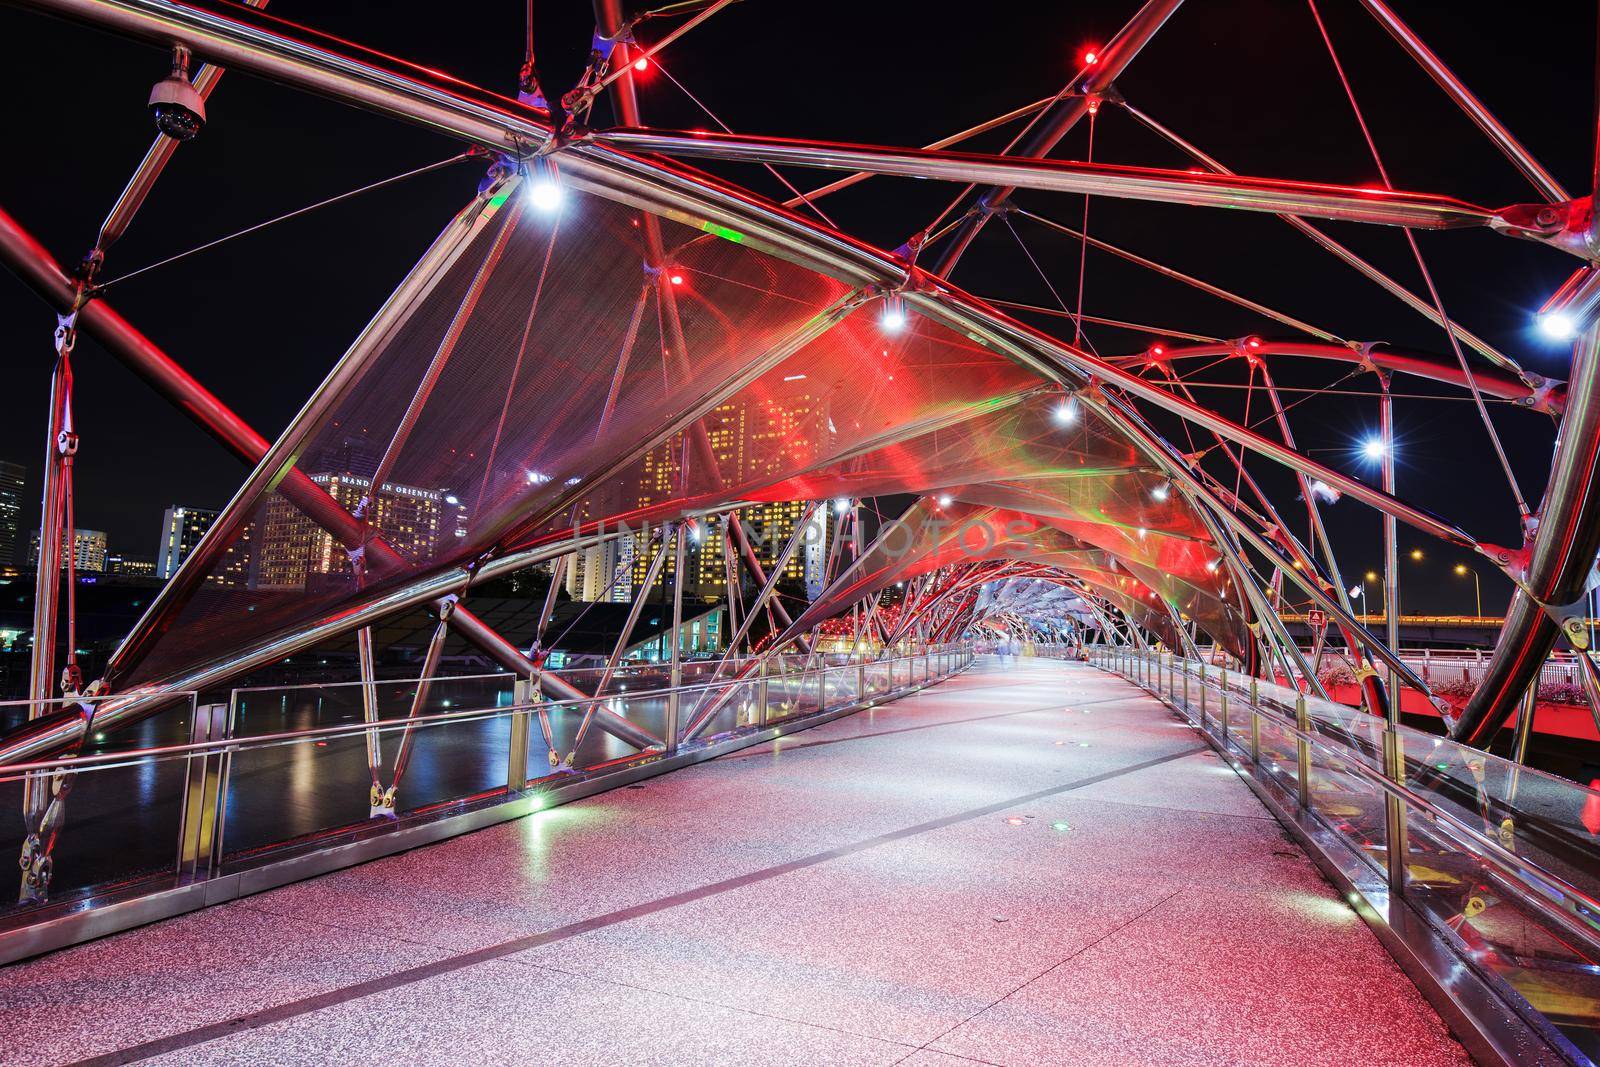 The Helix bridge at night in Singapore city